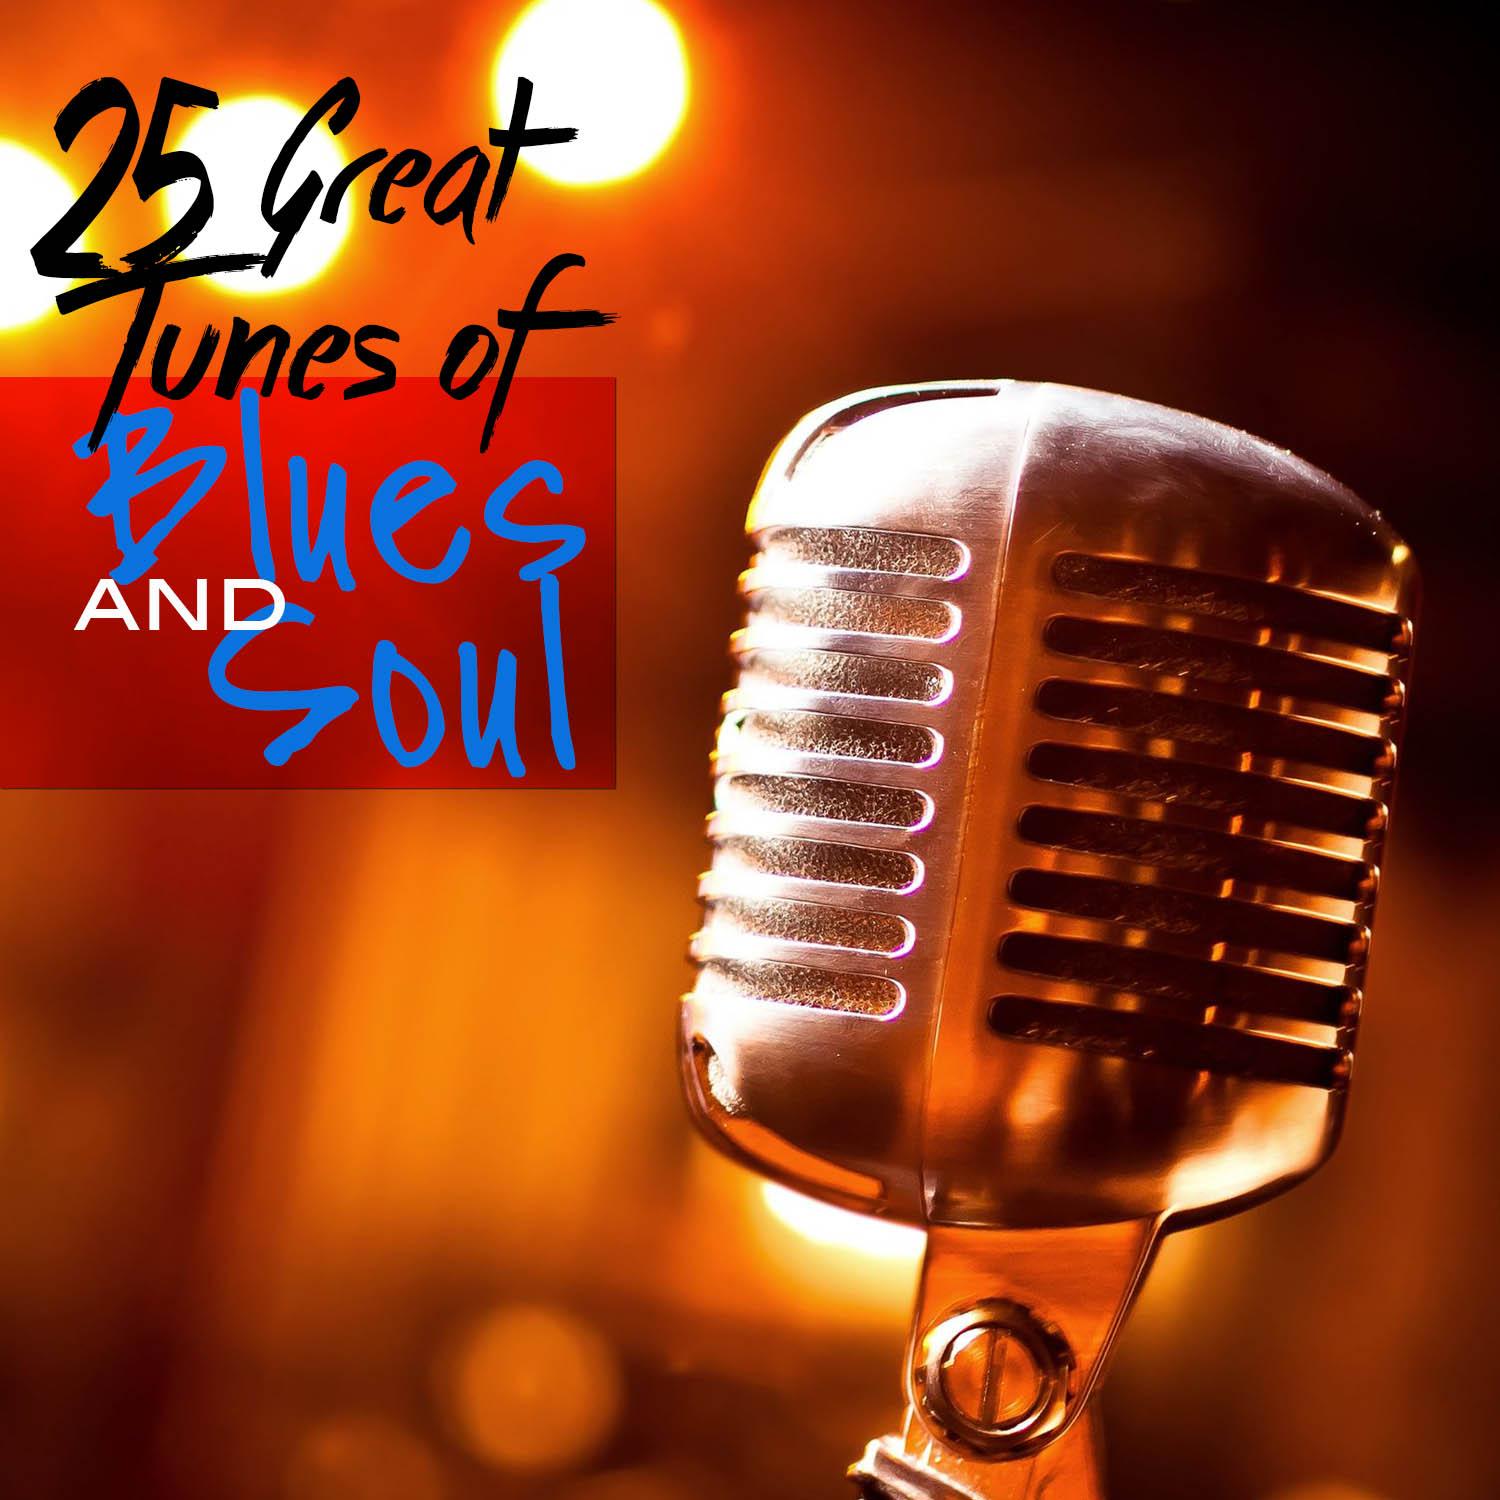 25 Great Tunes Of Blues And Soul